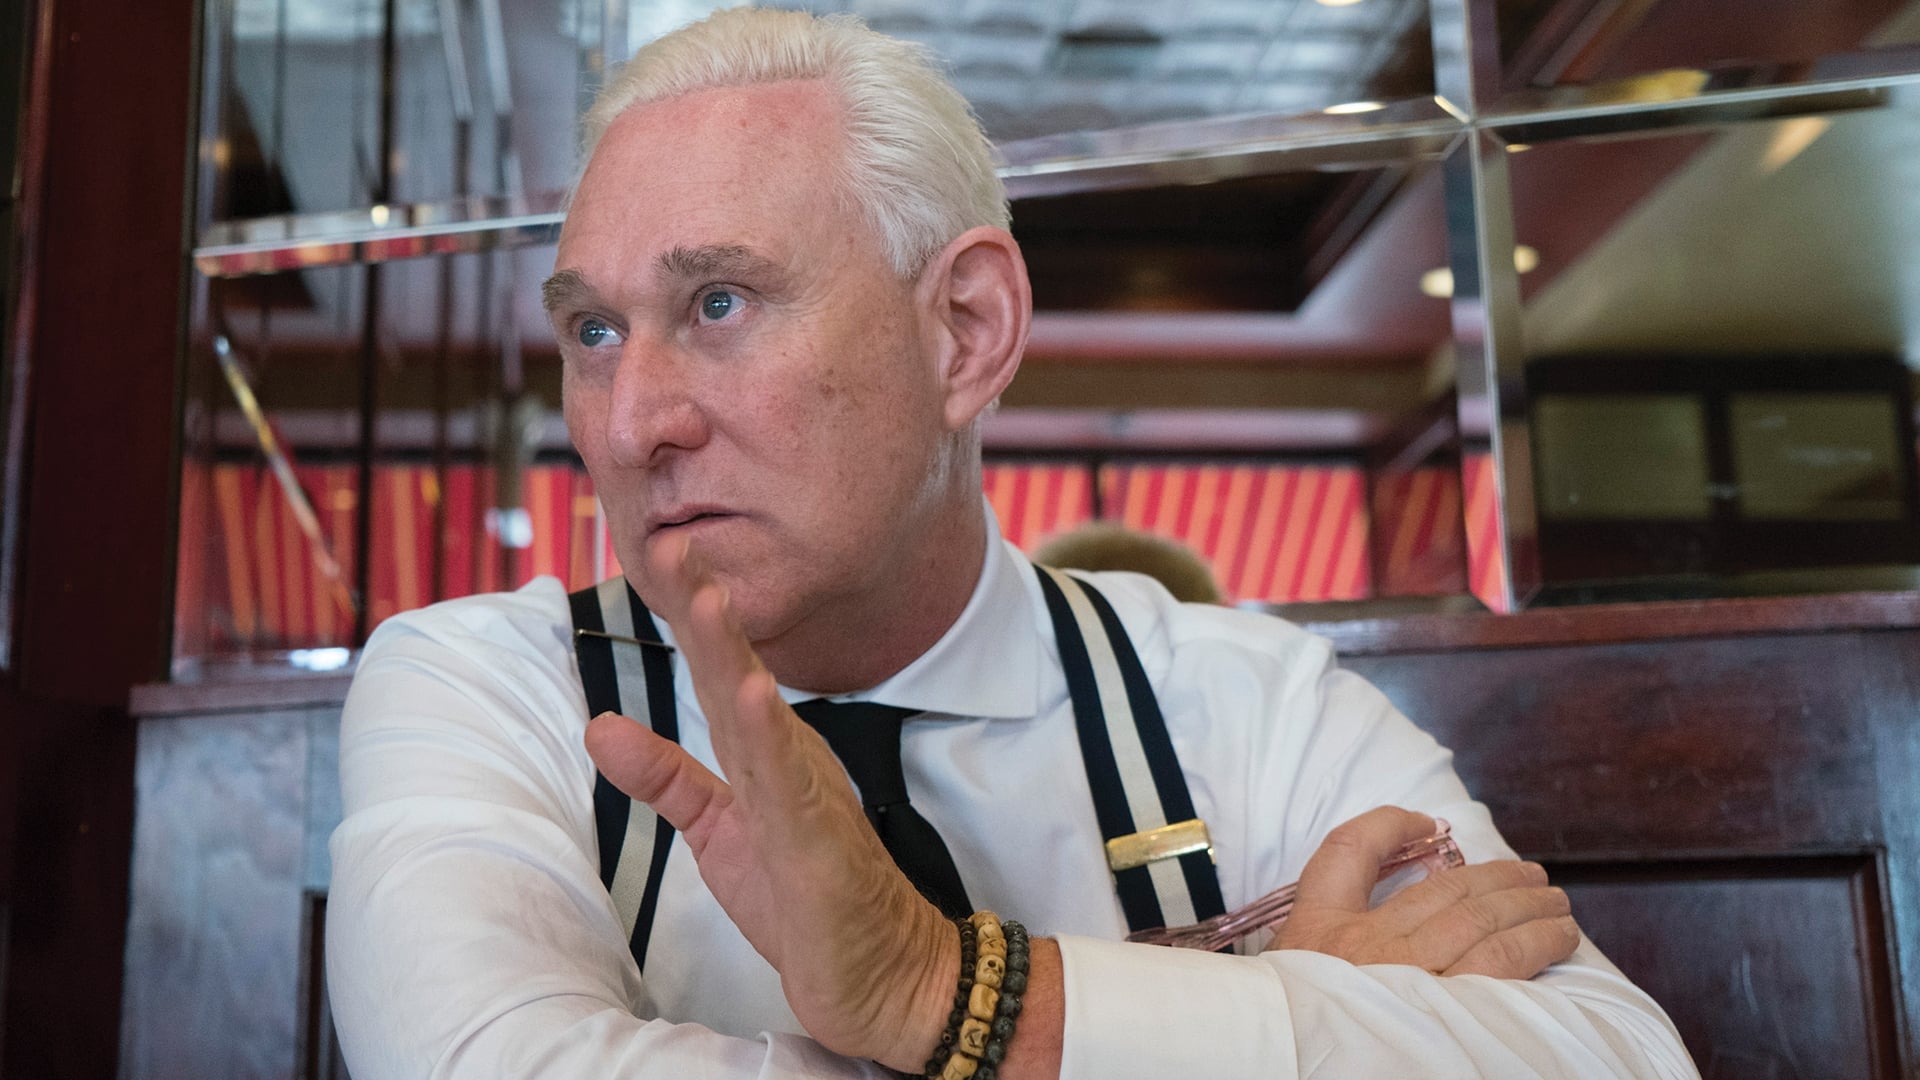 Get Me Roger Stone (2017)